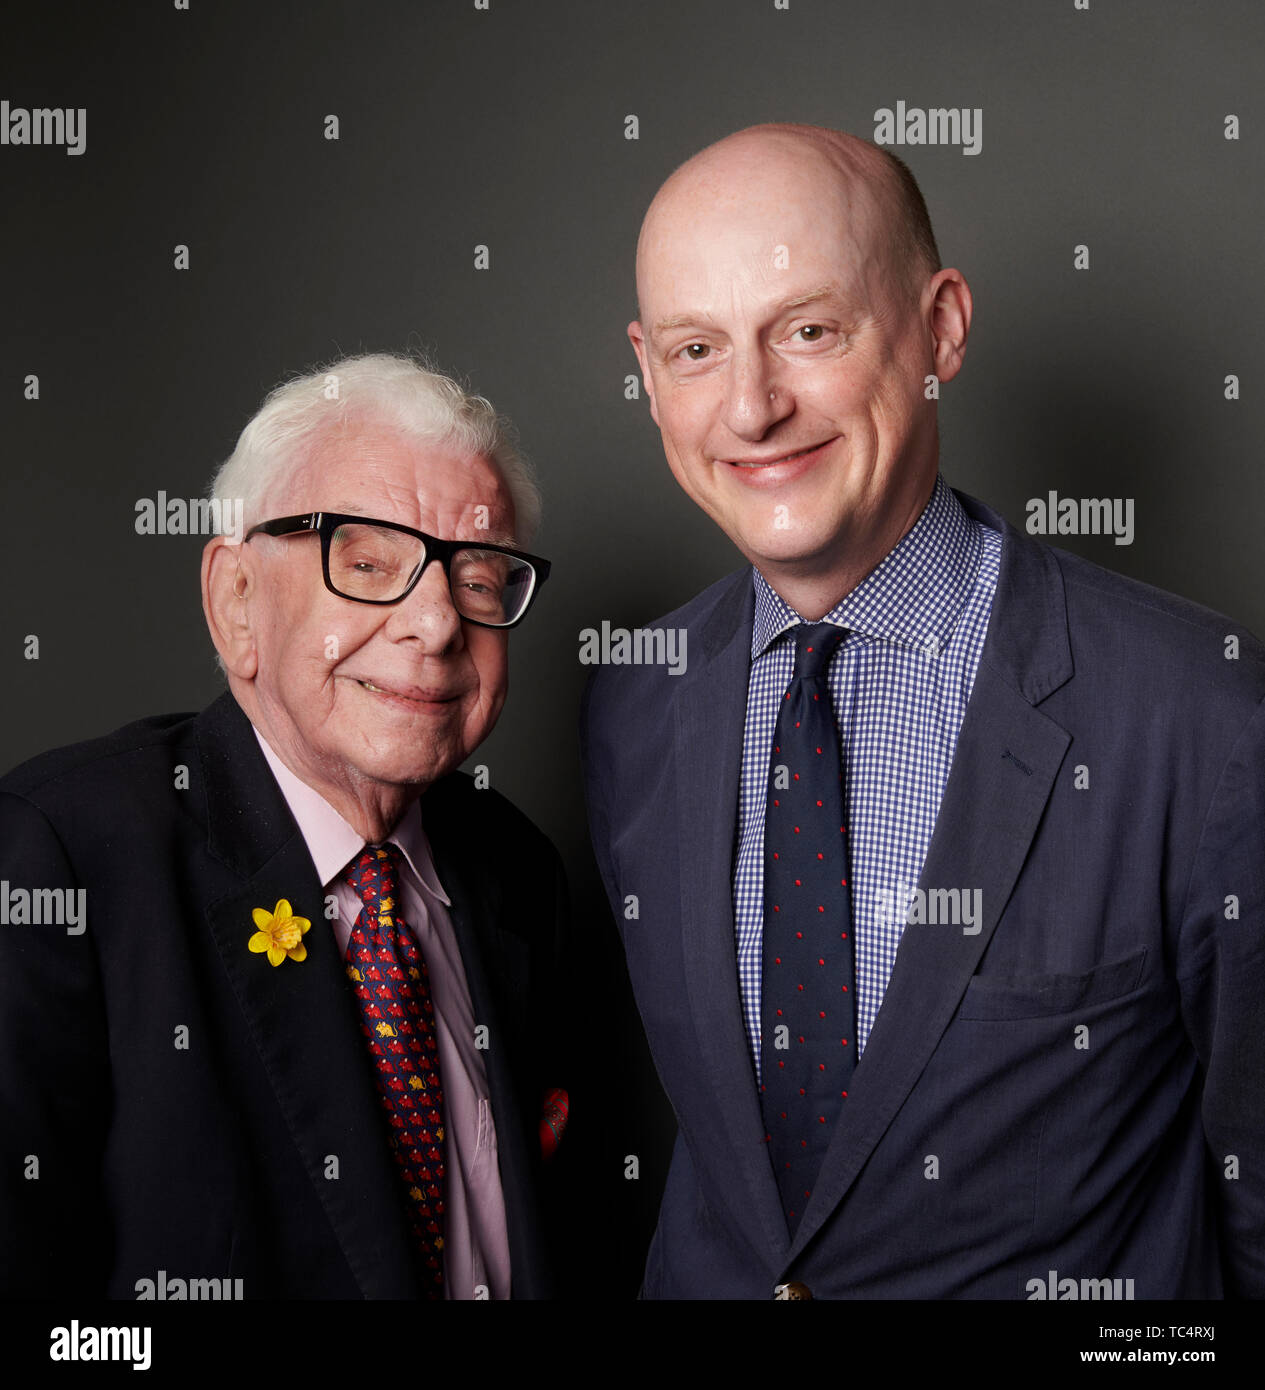 Barry Cryer & Harry Mount at The Oldie Literary Lunch 04/06/19 Stock Photo